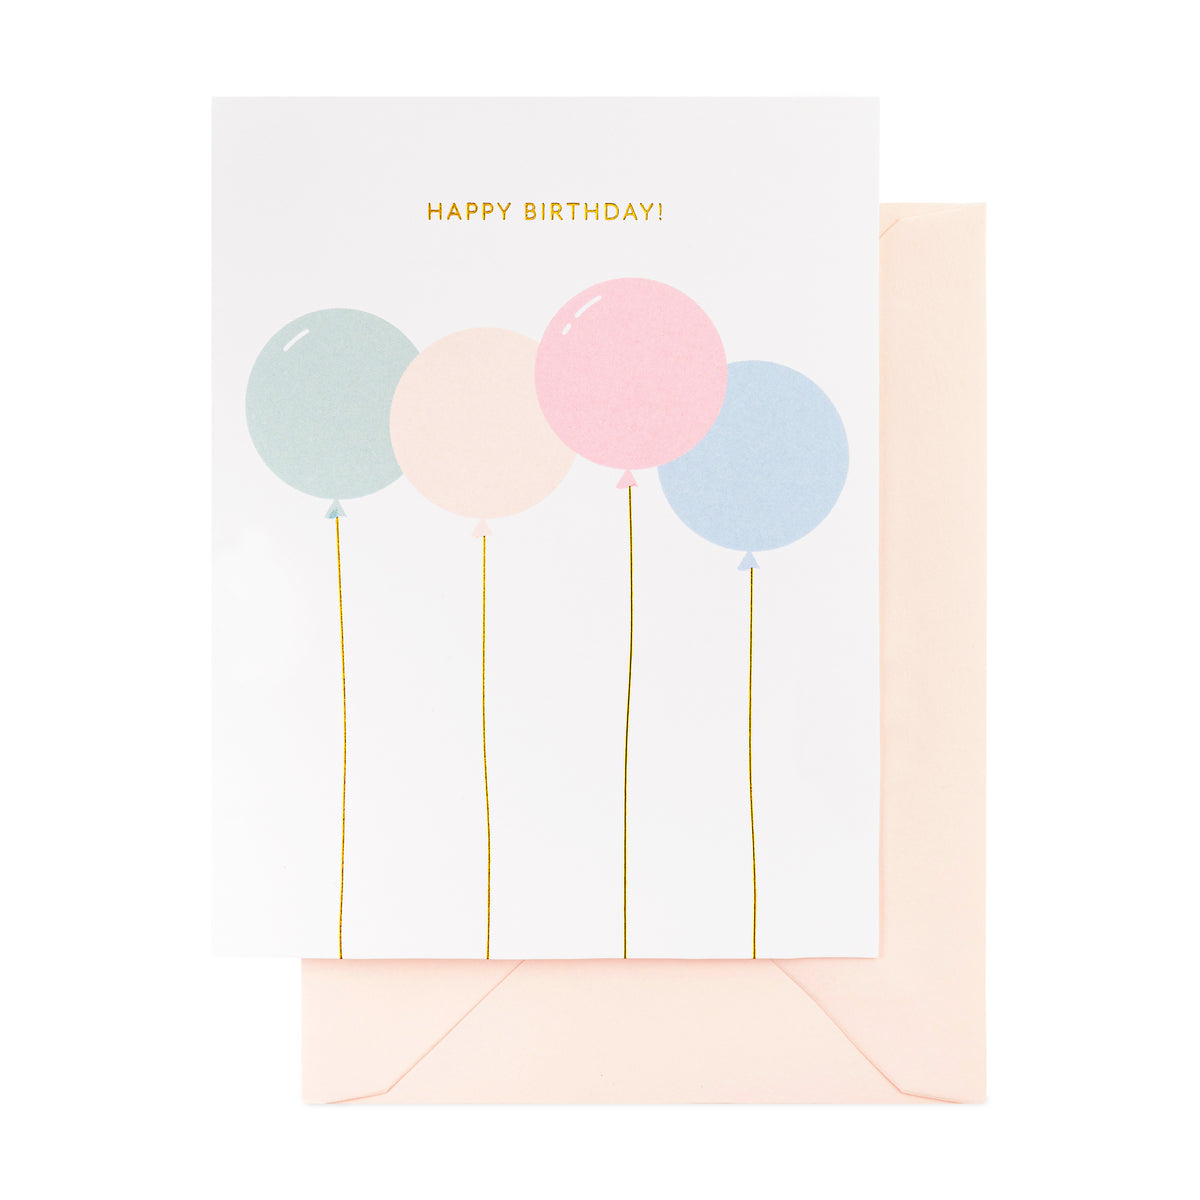 Colorful Balloons printed with Happy Birthday and paired a pink envelope